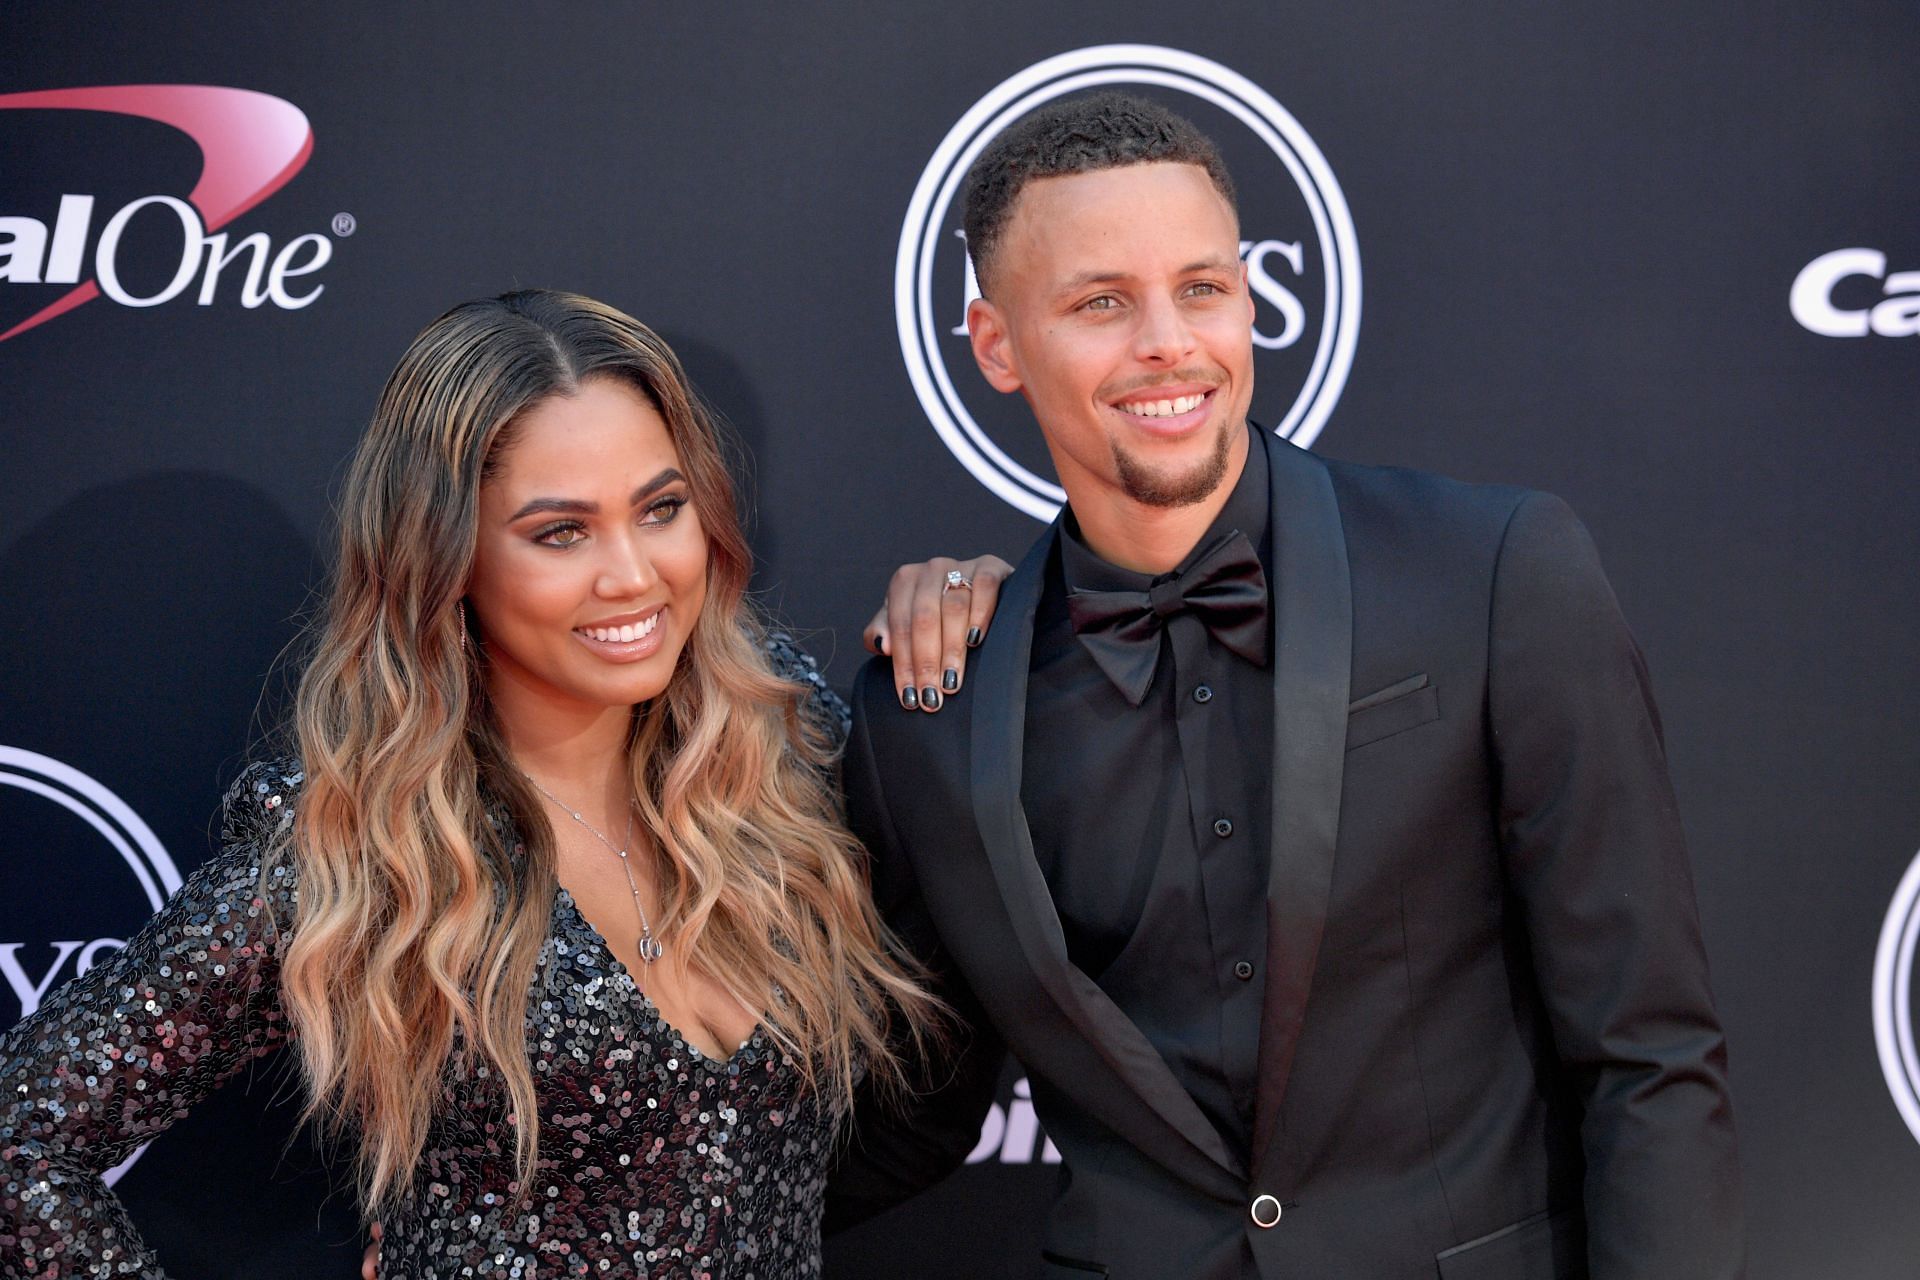 Ayesha Curry and Steph Curry at the 2017 ESPYs